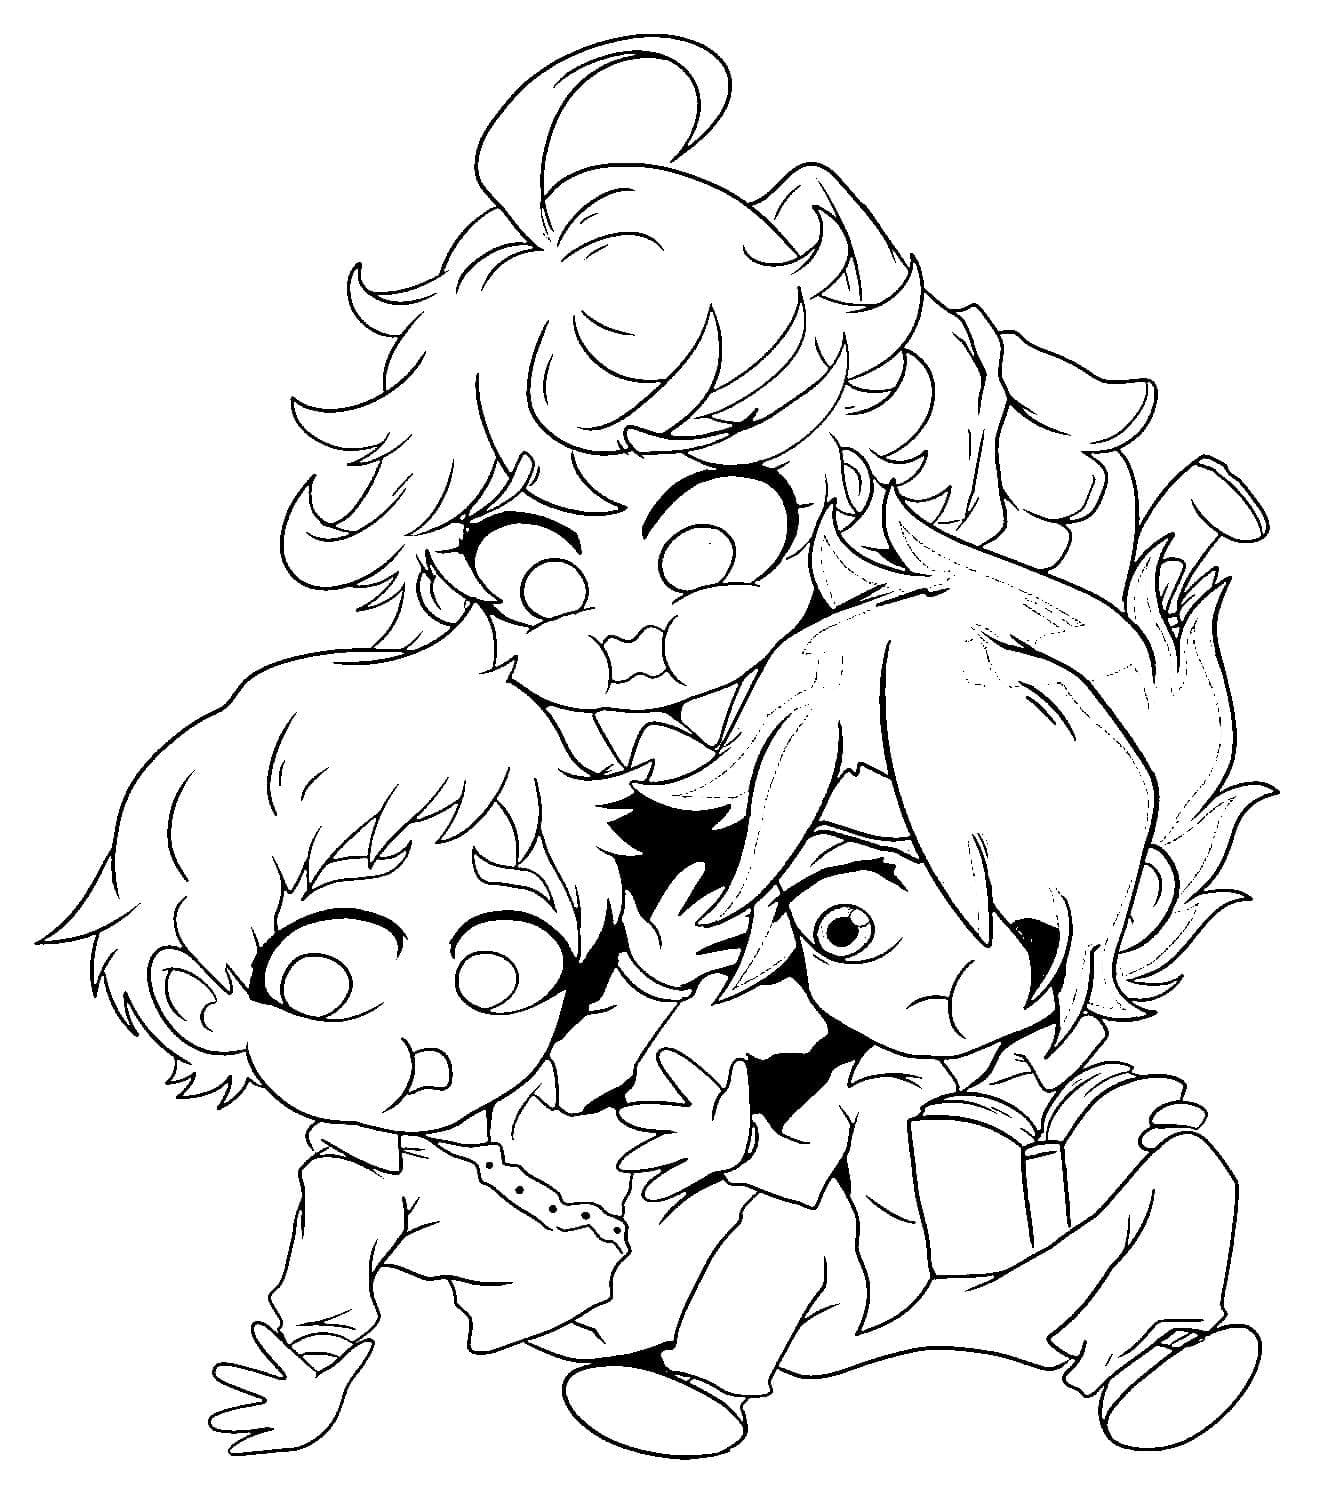 Adorable The Promised Neverland Coloring Page